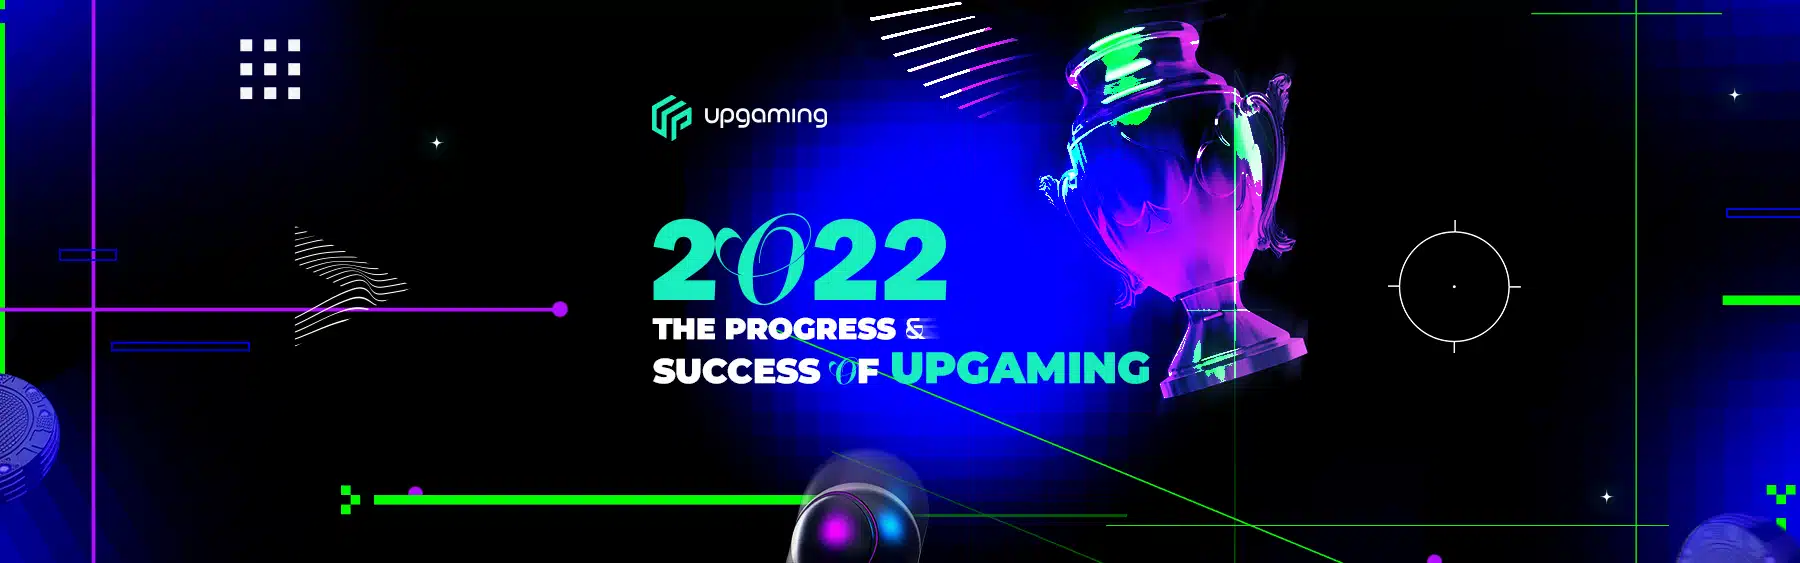 Upgaming's 2022 in review